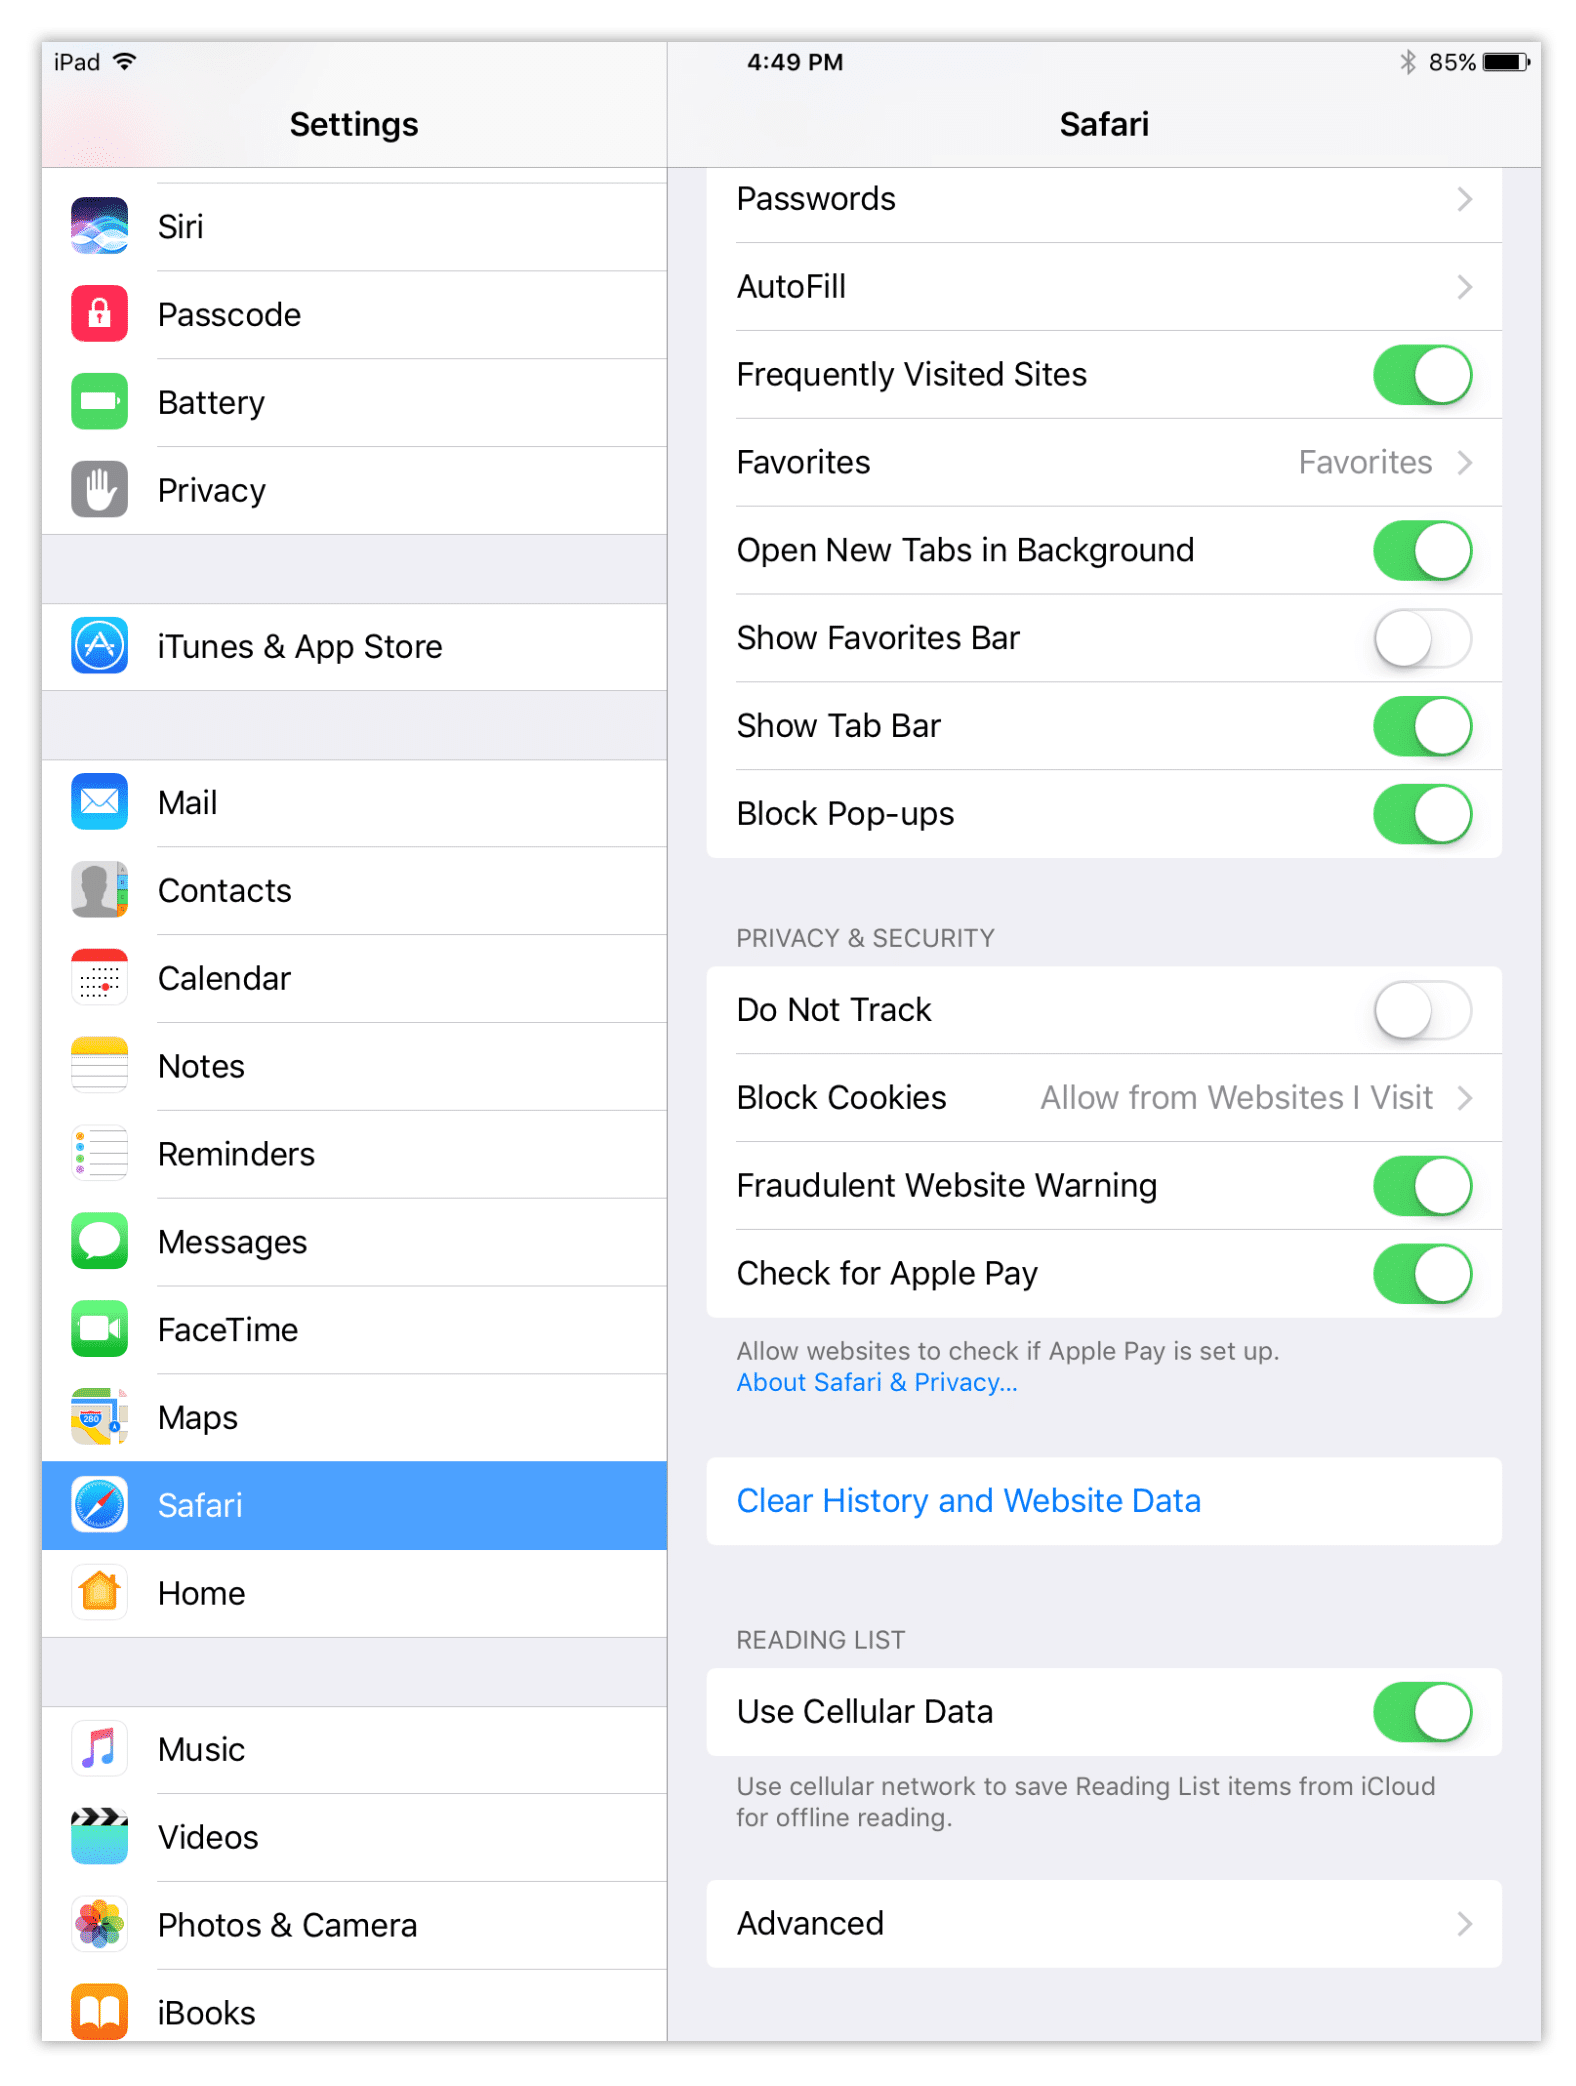 Clear history and website data in safari on iPad